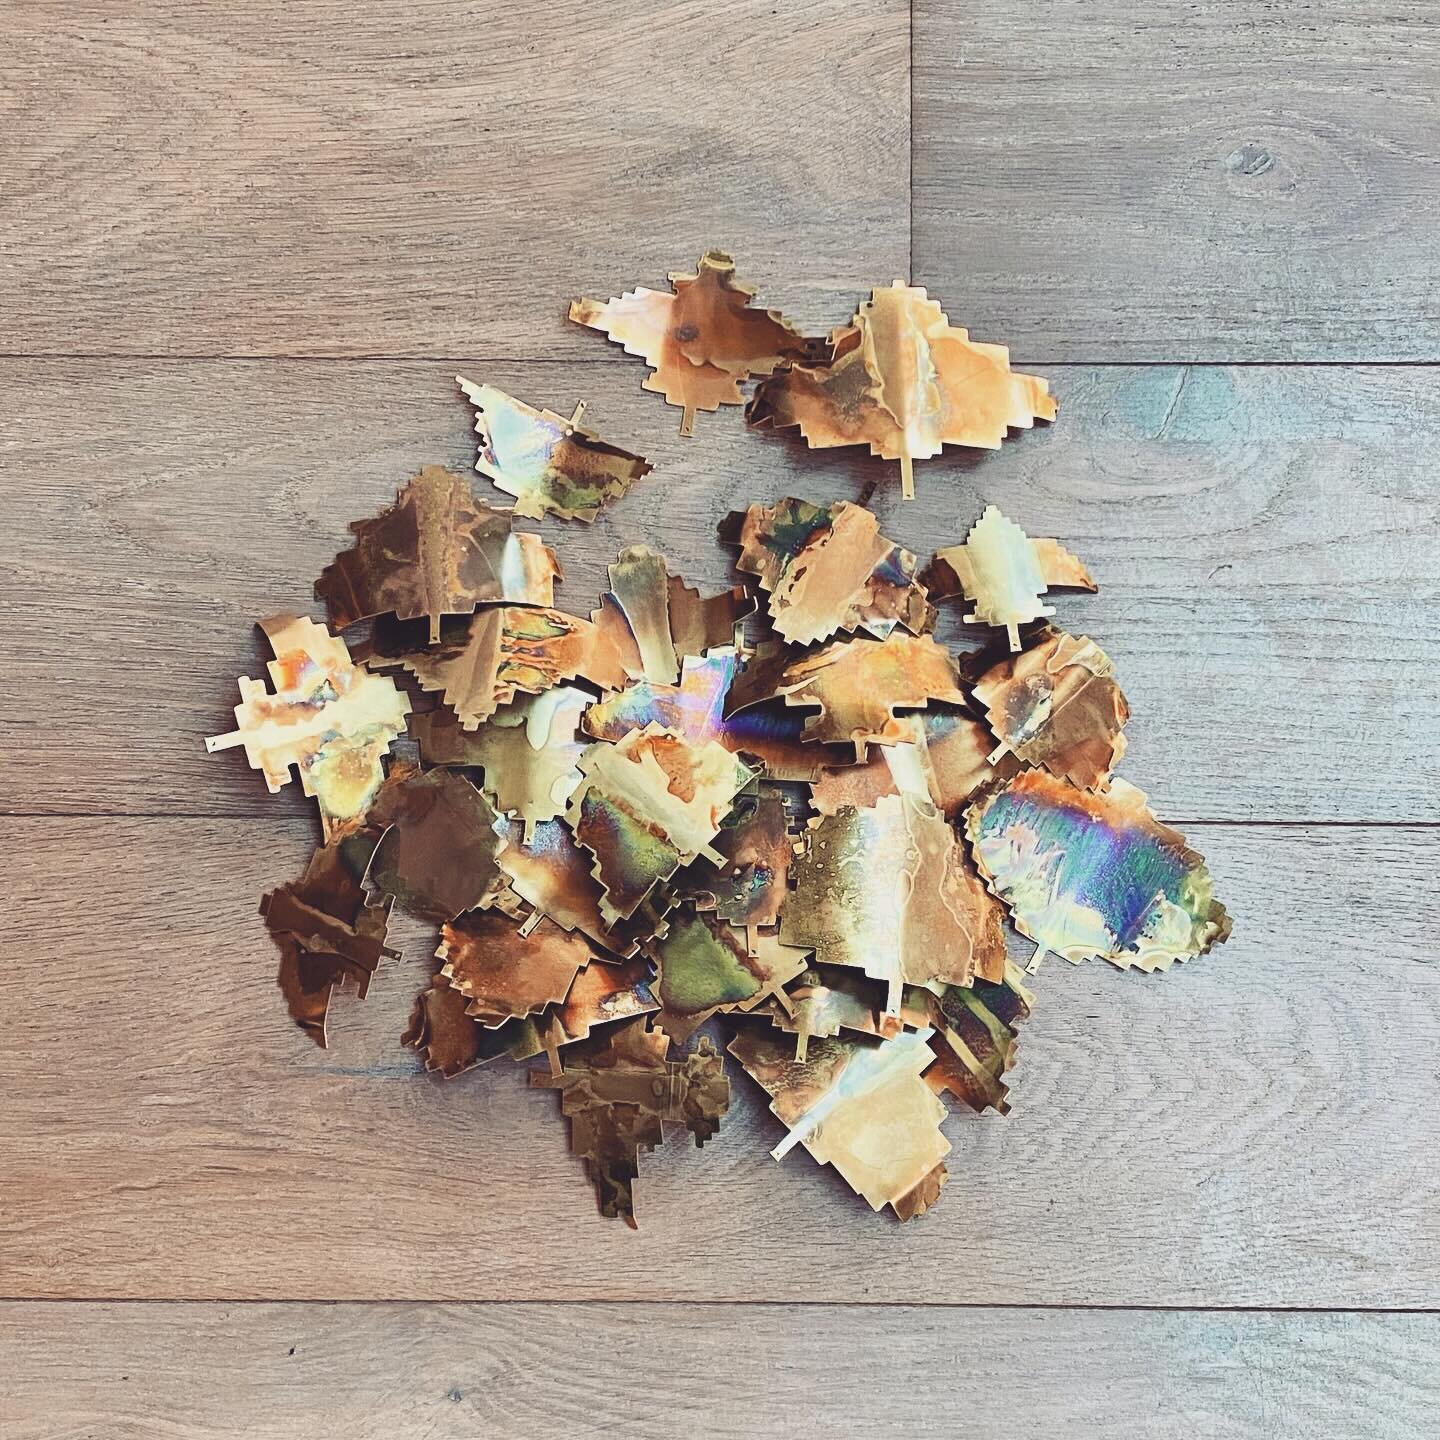 IN THE STUDIO
Silent Autumn
Sound waves of birdsong recordings transcribed into burnished brass 

Continuing my studio experiments around the possibilities of creating visual markers to denote a silence. Each of the &lsquo;leaves&rsquo; represents th